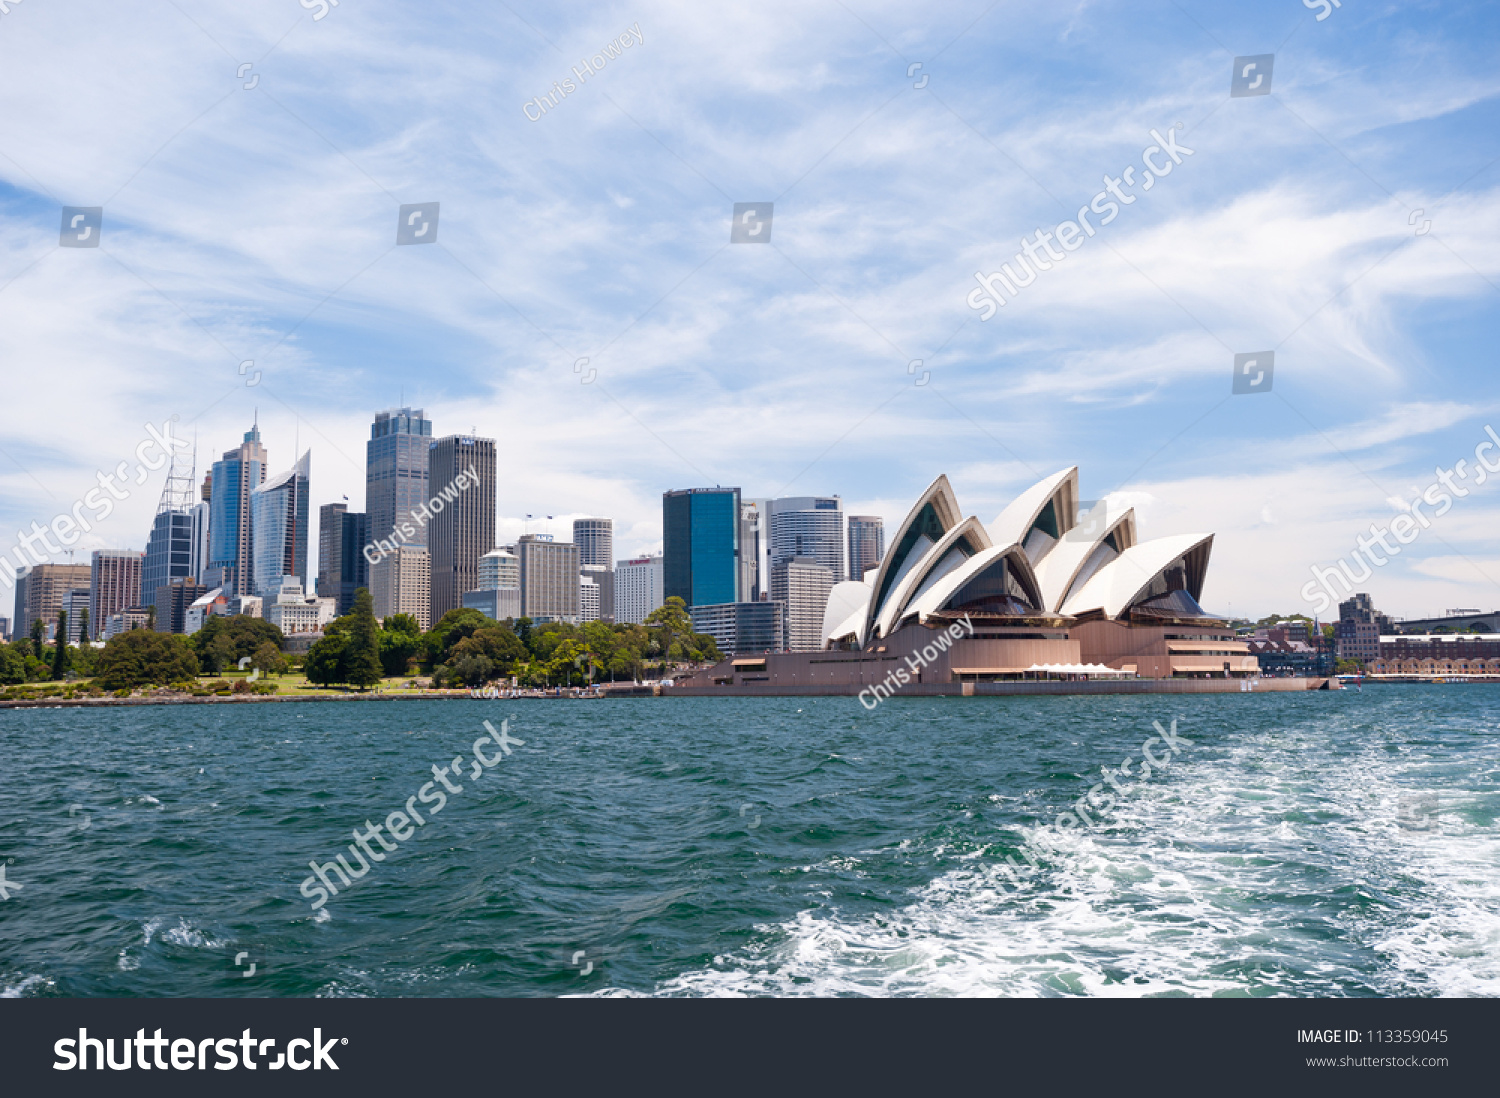 SYDNEY - JANUARY 13: The Iconic Sydney Opera House is a multi-venue performing arts centre also containing bars and outdoor restaurants.January 13, 2012 in Sydney, Australia. #113359045